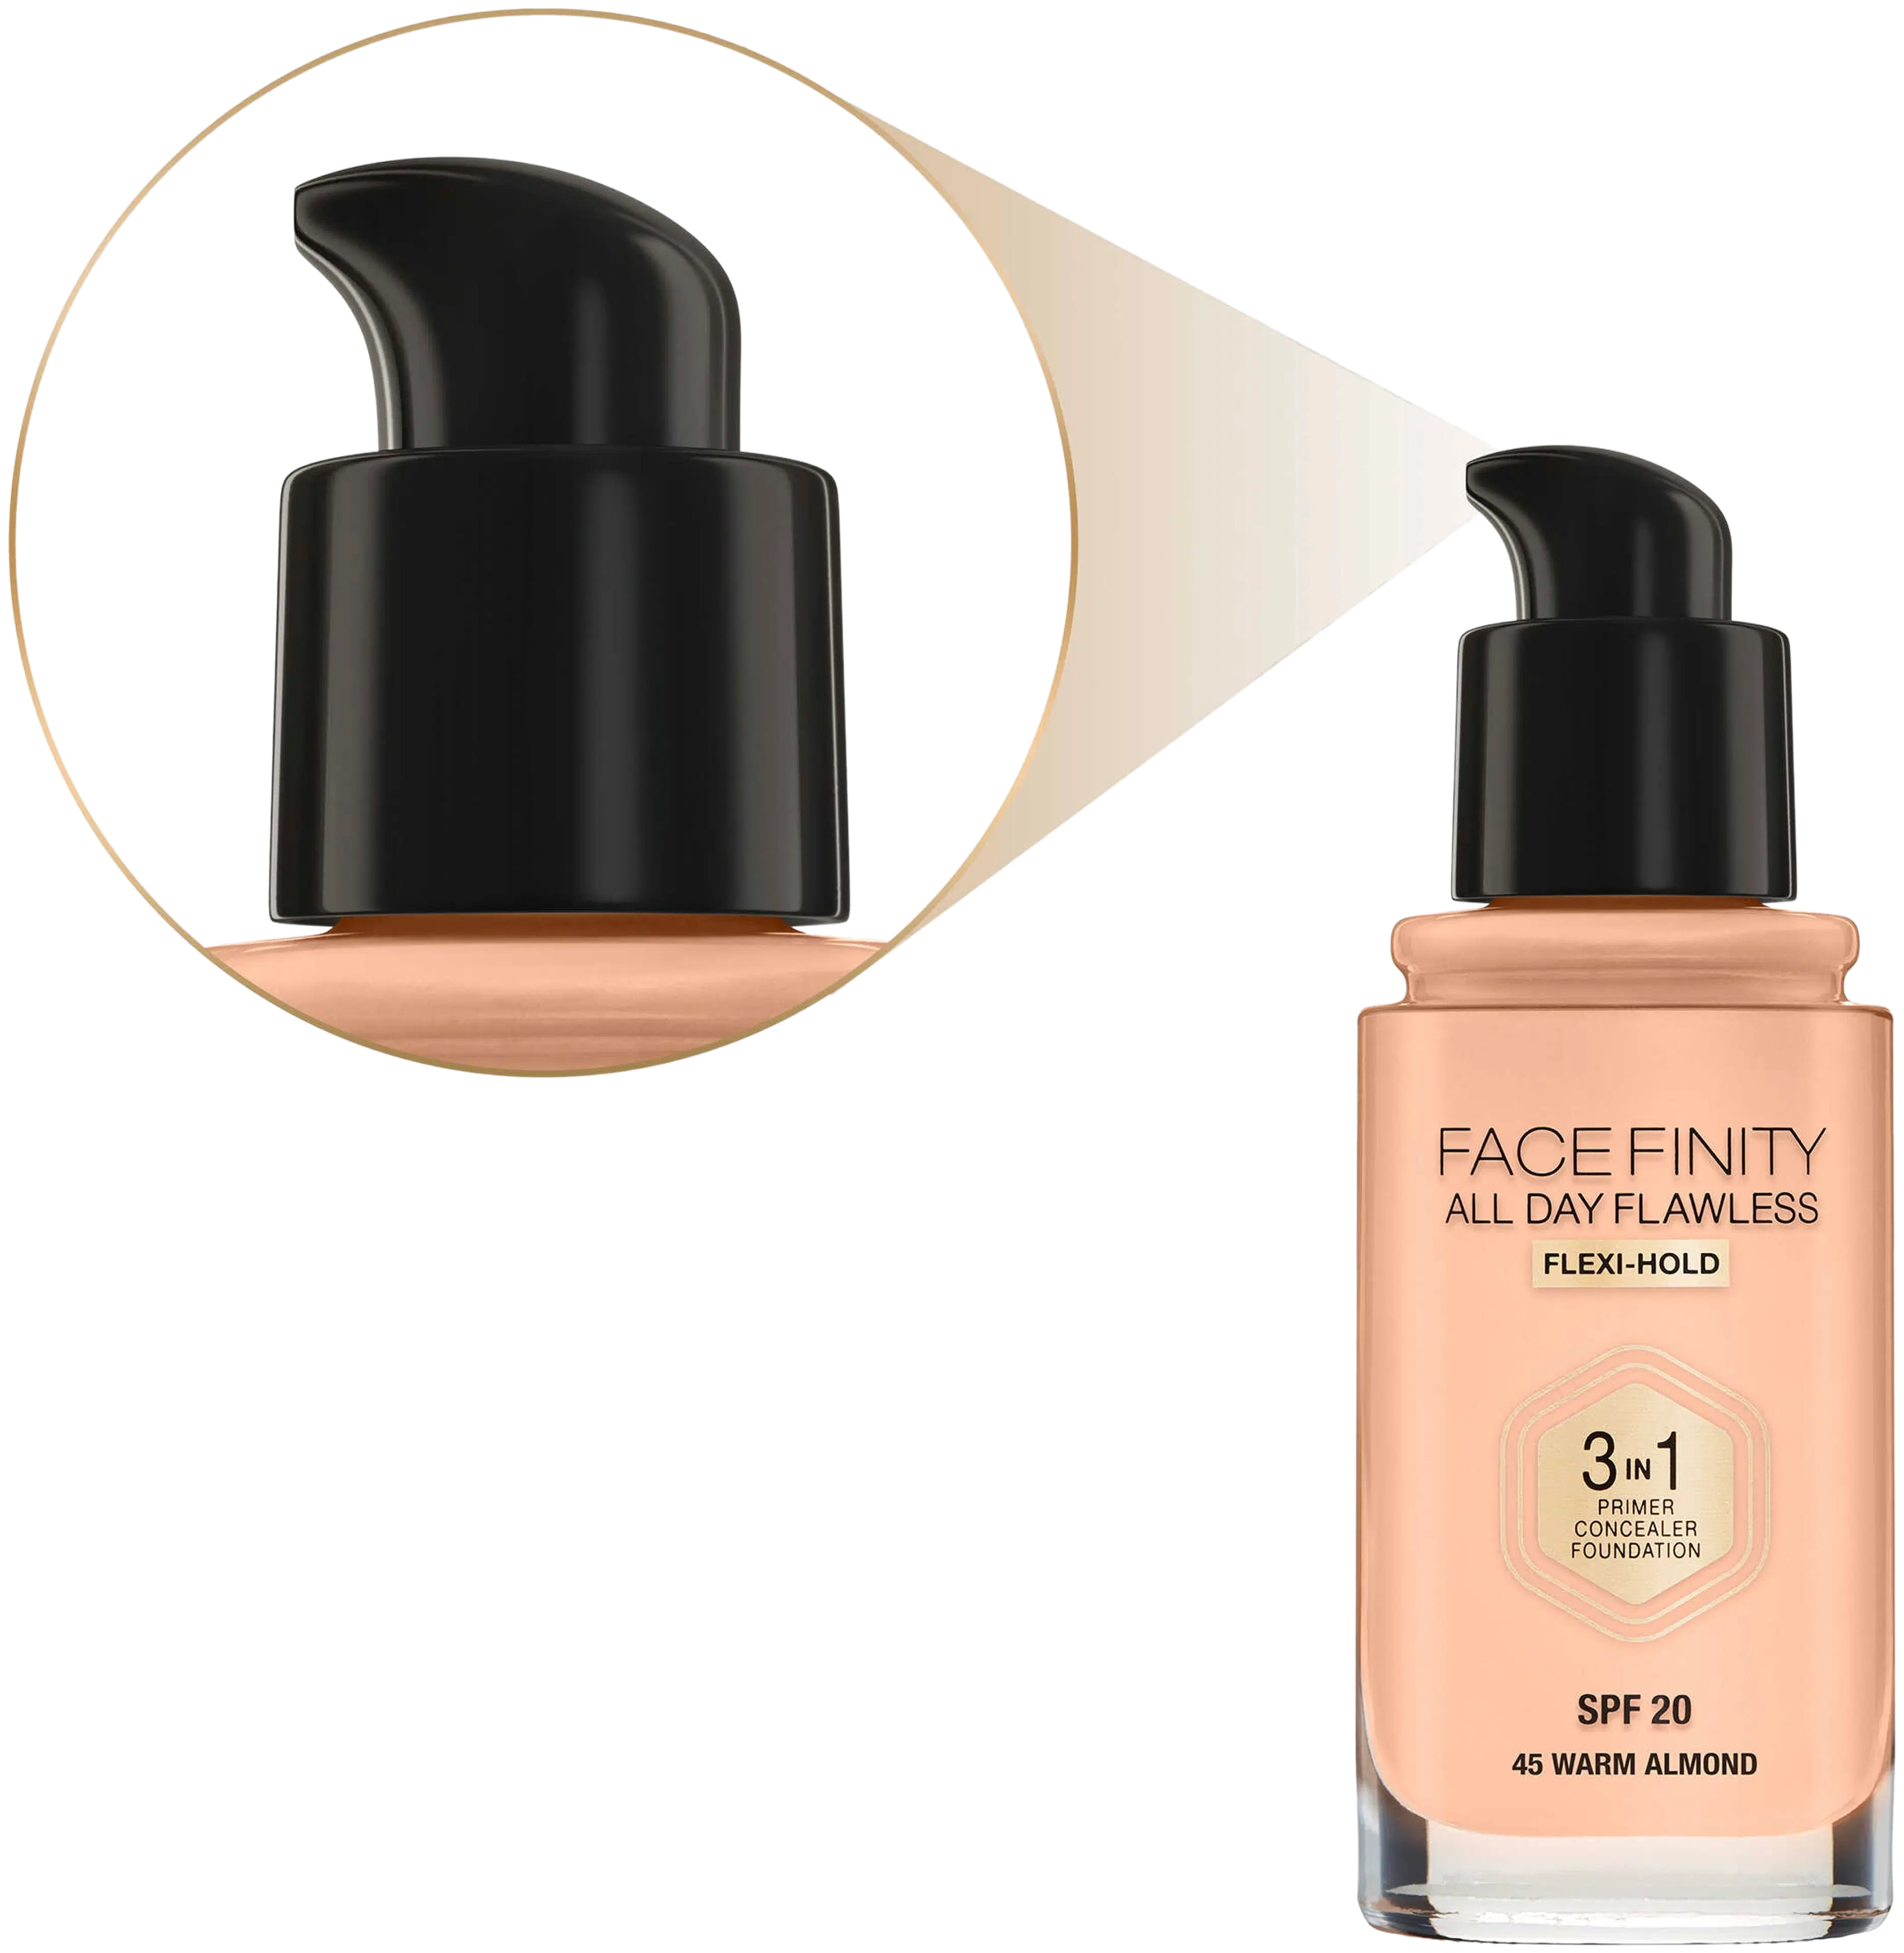 Max Factor Facefinity All Day Flawless 3in1 Foundation 45 Warm Almond 30ml